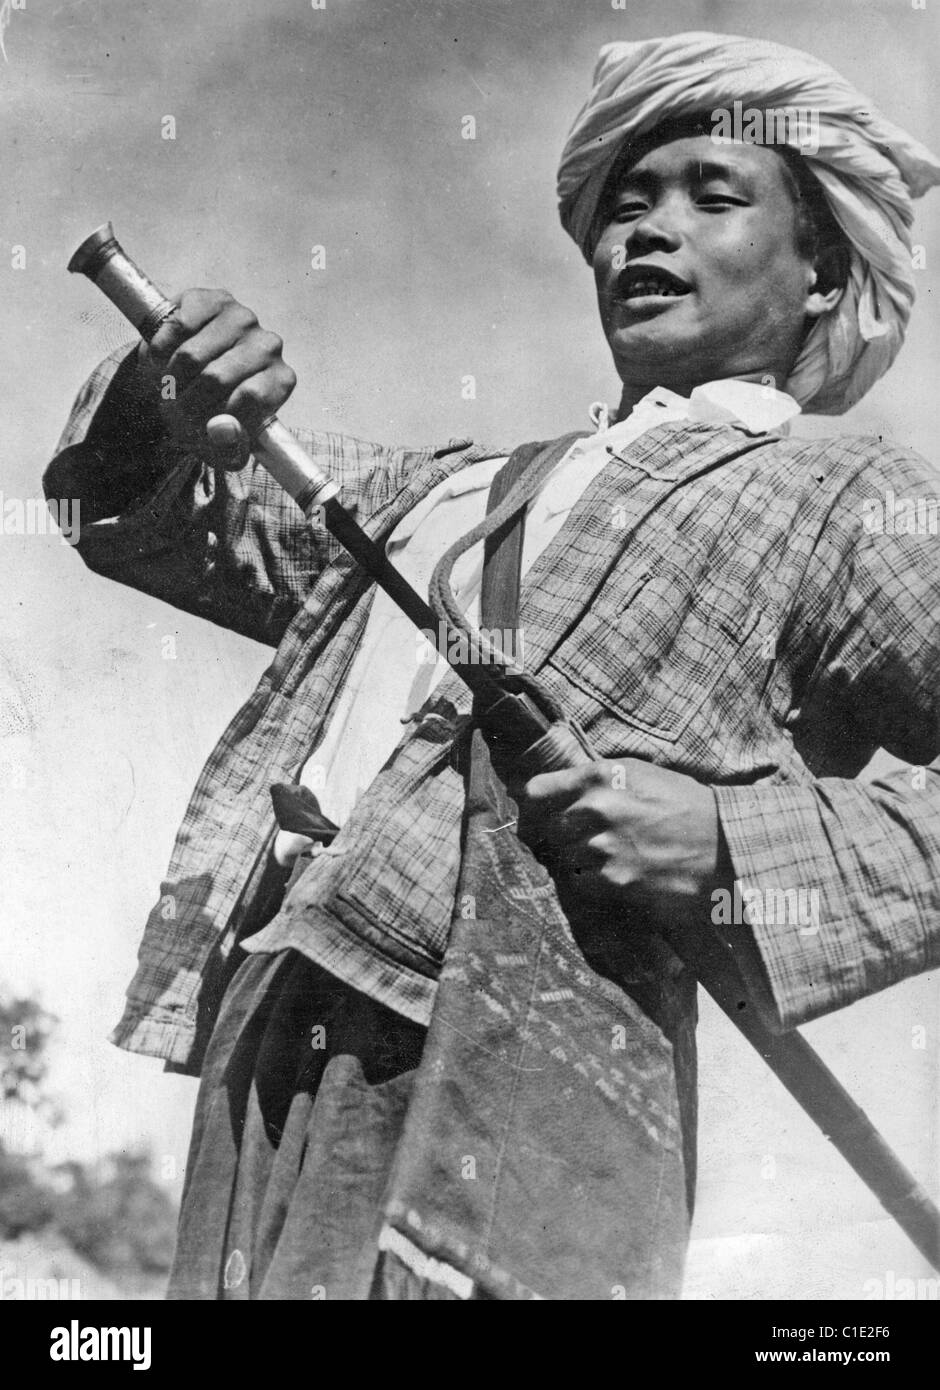 BURMA 1940 Member of the Kachin tribe fighting the Japanese invasion. His sword is called a Dah. Stock Photo